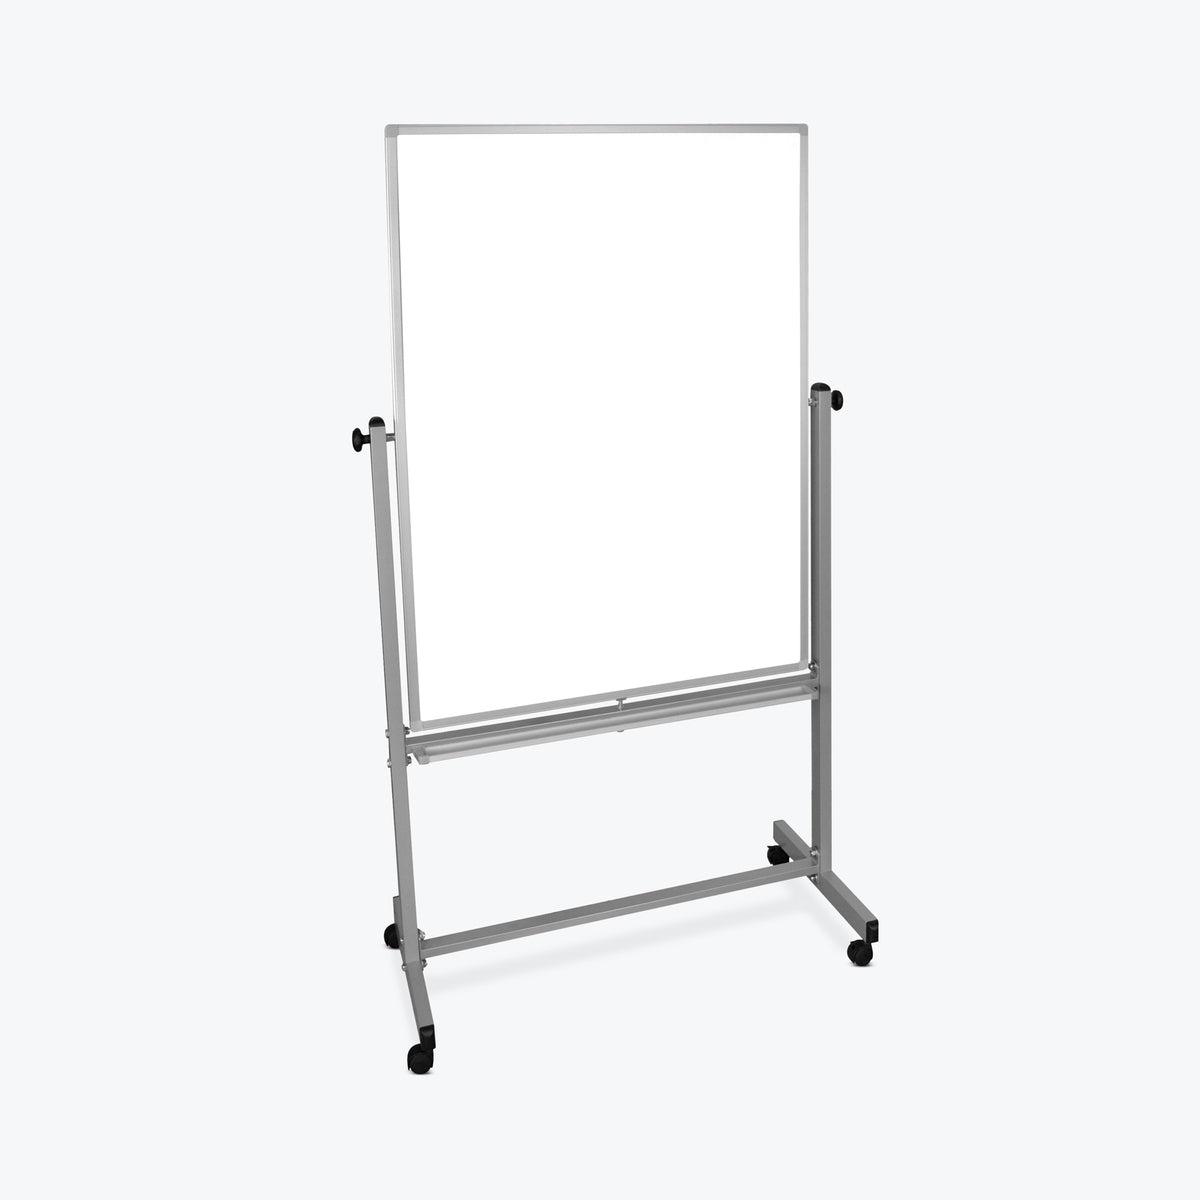 36"W x 48"H Mobile Double-Sided Magnetic Whiteboard